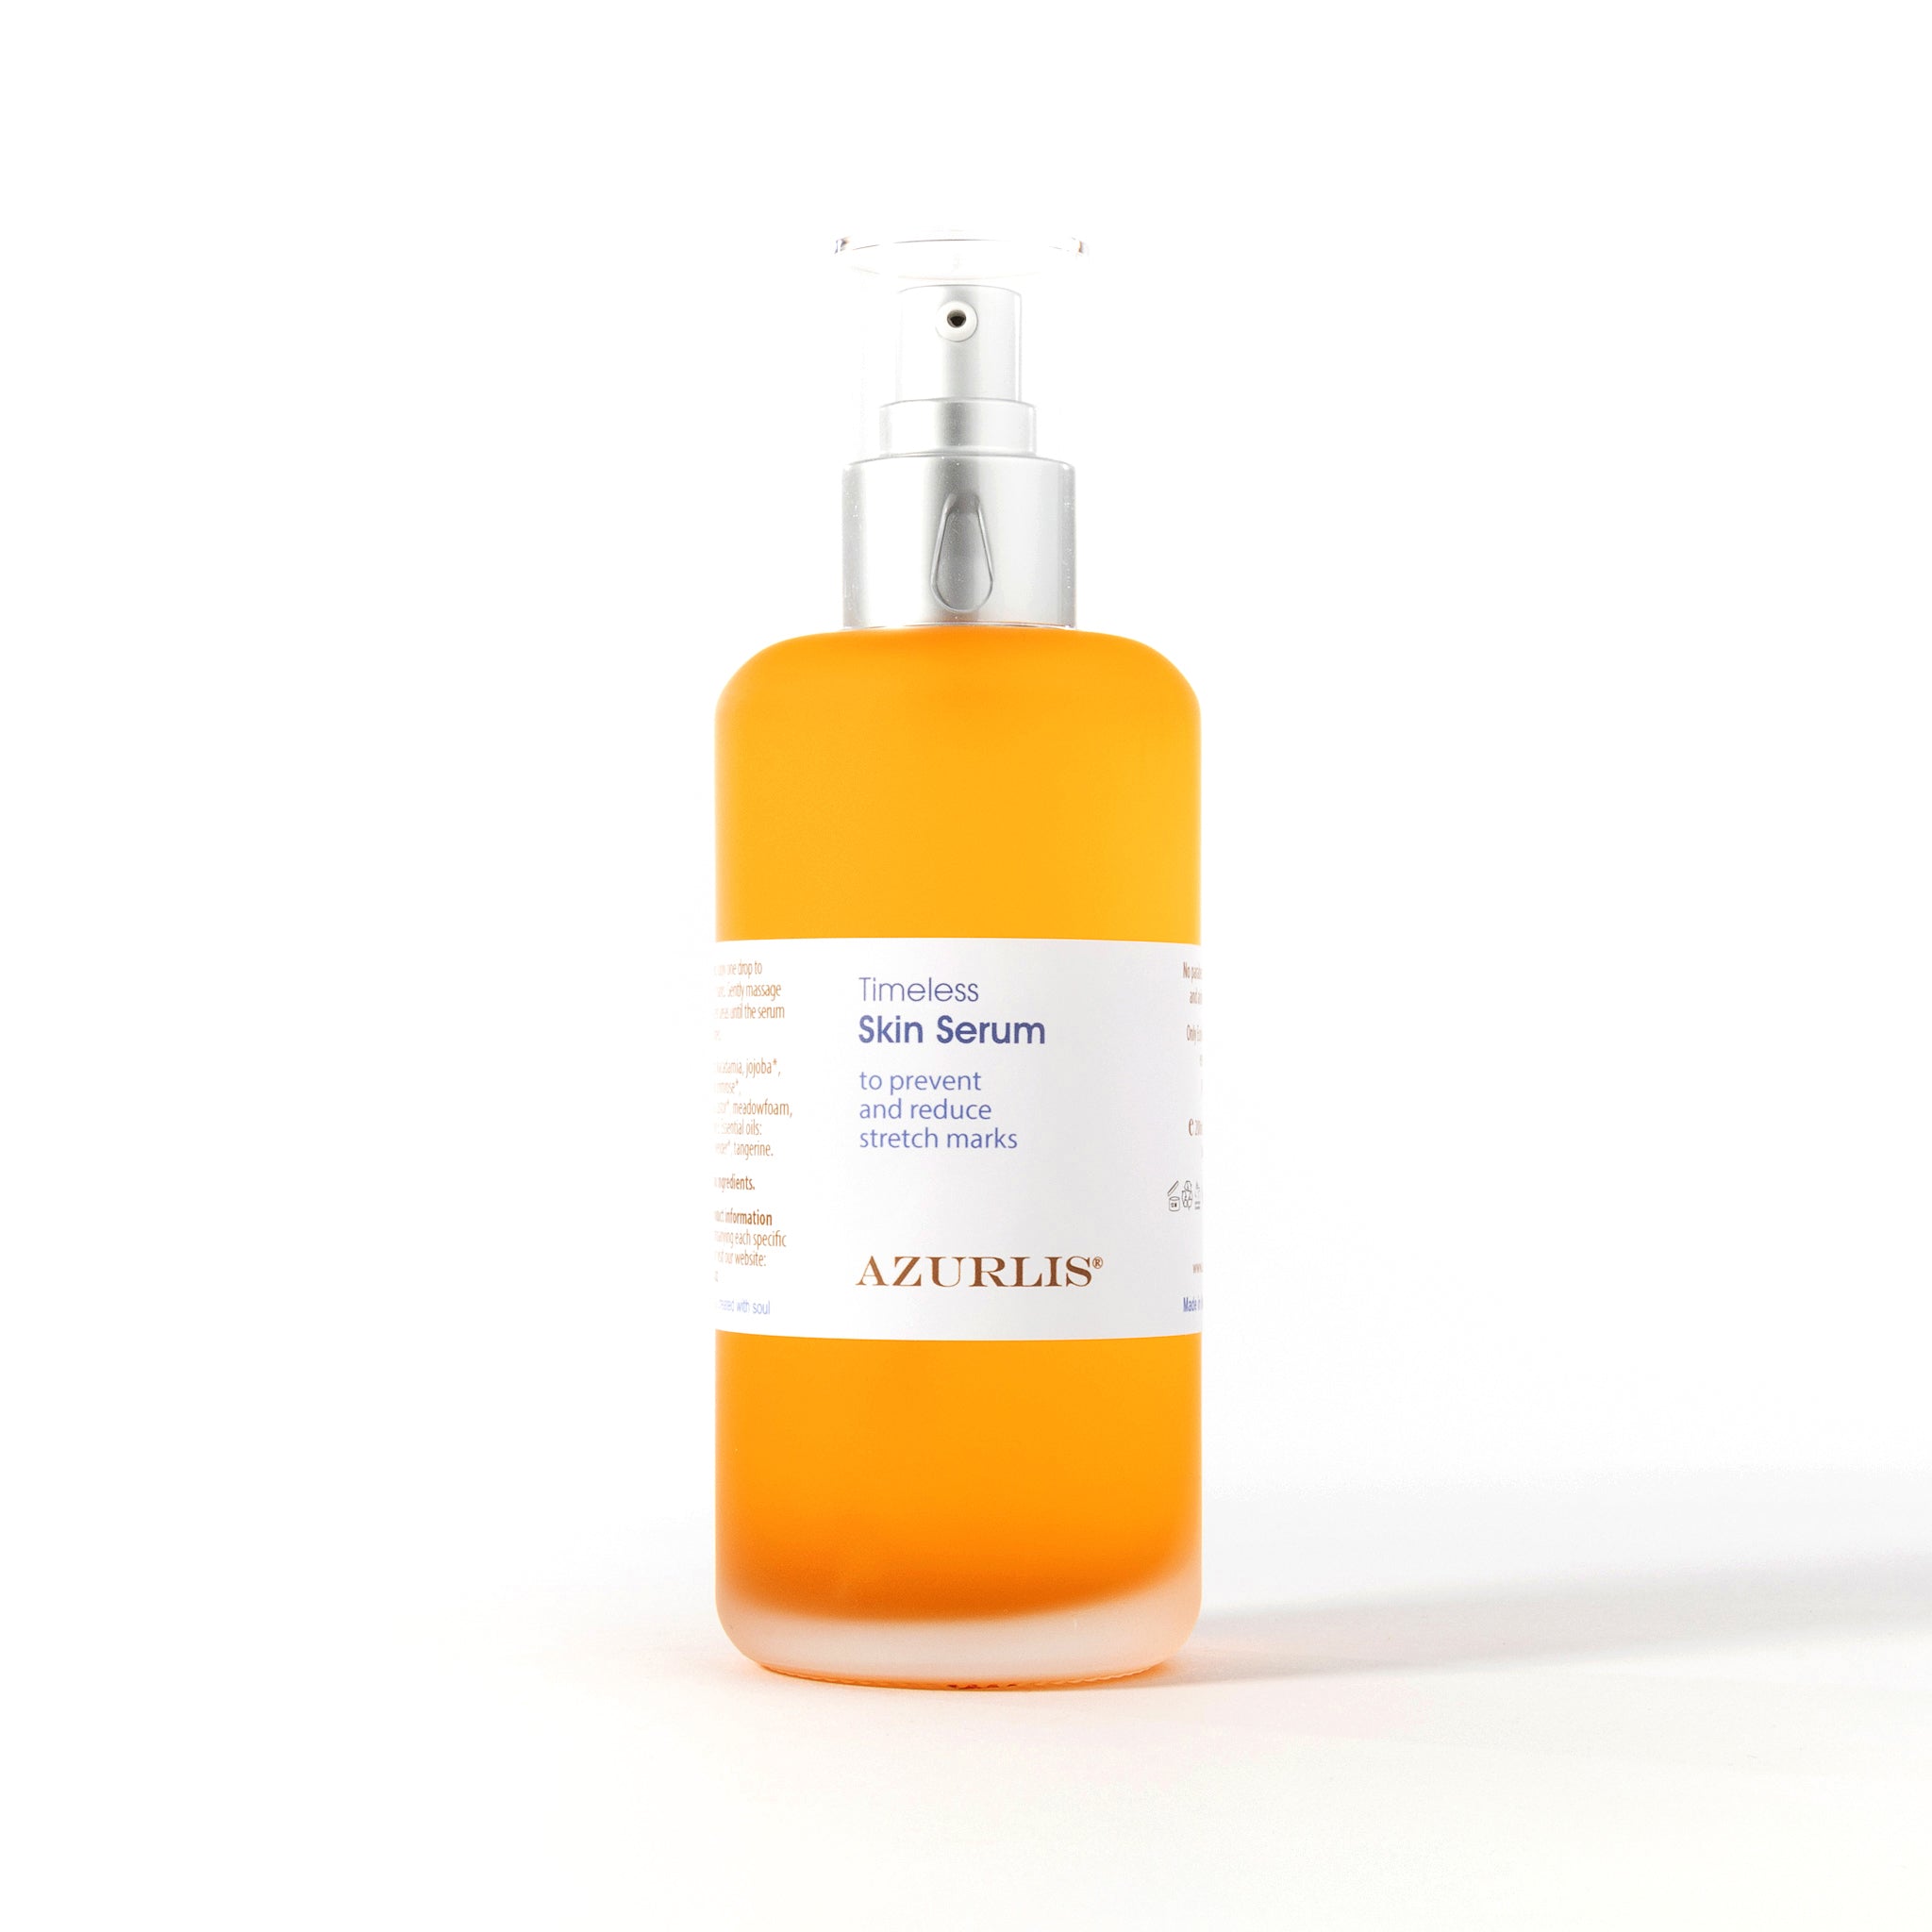 Azurlis™ Timeless Skin Serum 200ml is formulated to encourage deep cellular regeneration and skin restructuring.   With botanical oils including macadamia oil, organic jojoba oil, borage oil, organic evening primrose oil, organic rosehip oil, camellia oil, as well as essential oils from rosa damascena, lavender and tangerine.   Ideal to help reduce stretch marks and improve the condition of scar tissue. 